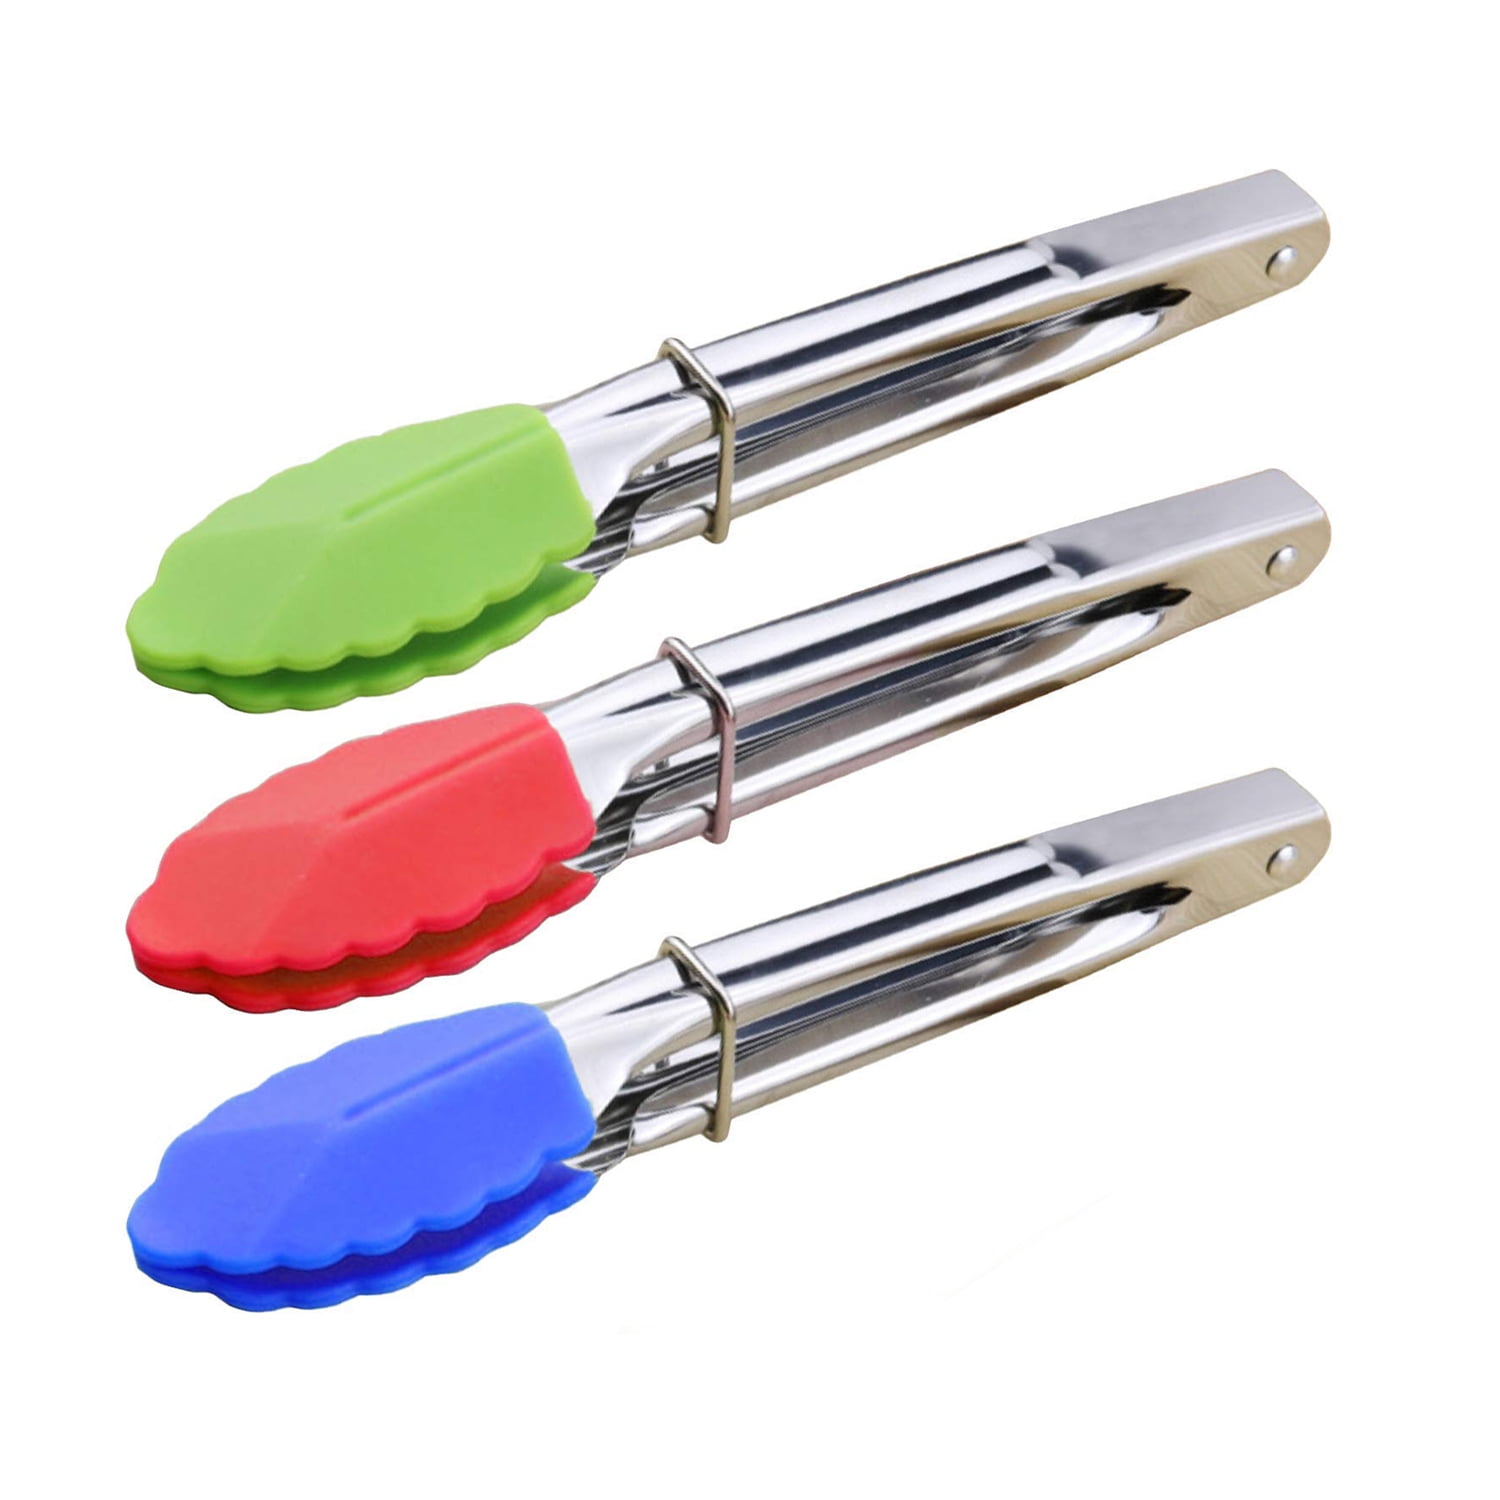 HINMAY Mini Tongs with Silicone Tips 7-Inch Serving Tongs Set of 3 Red Blue Green 